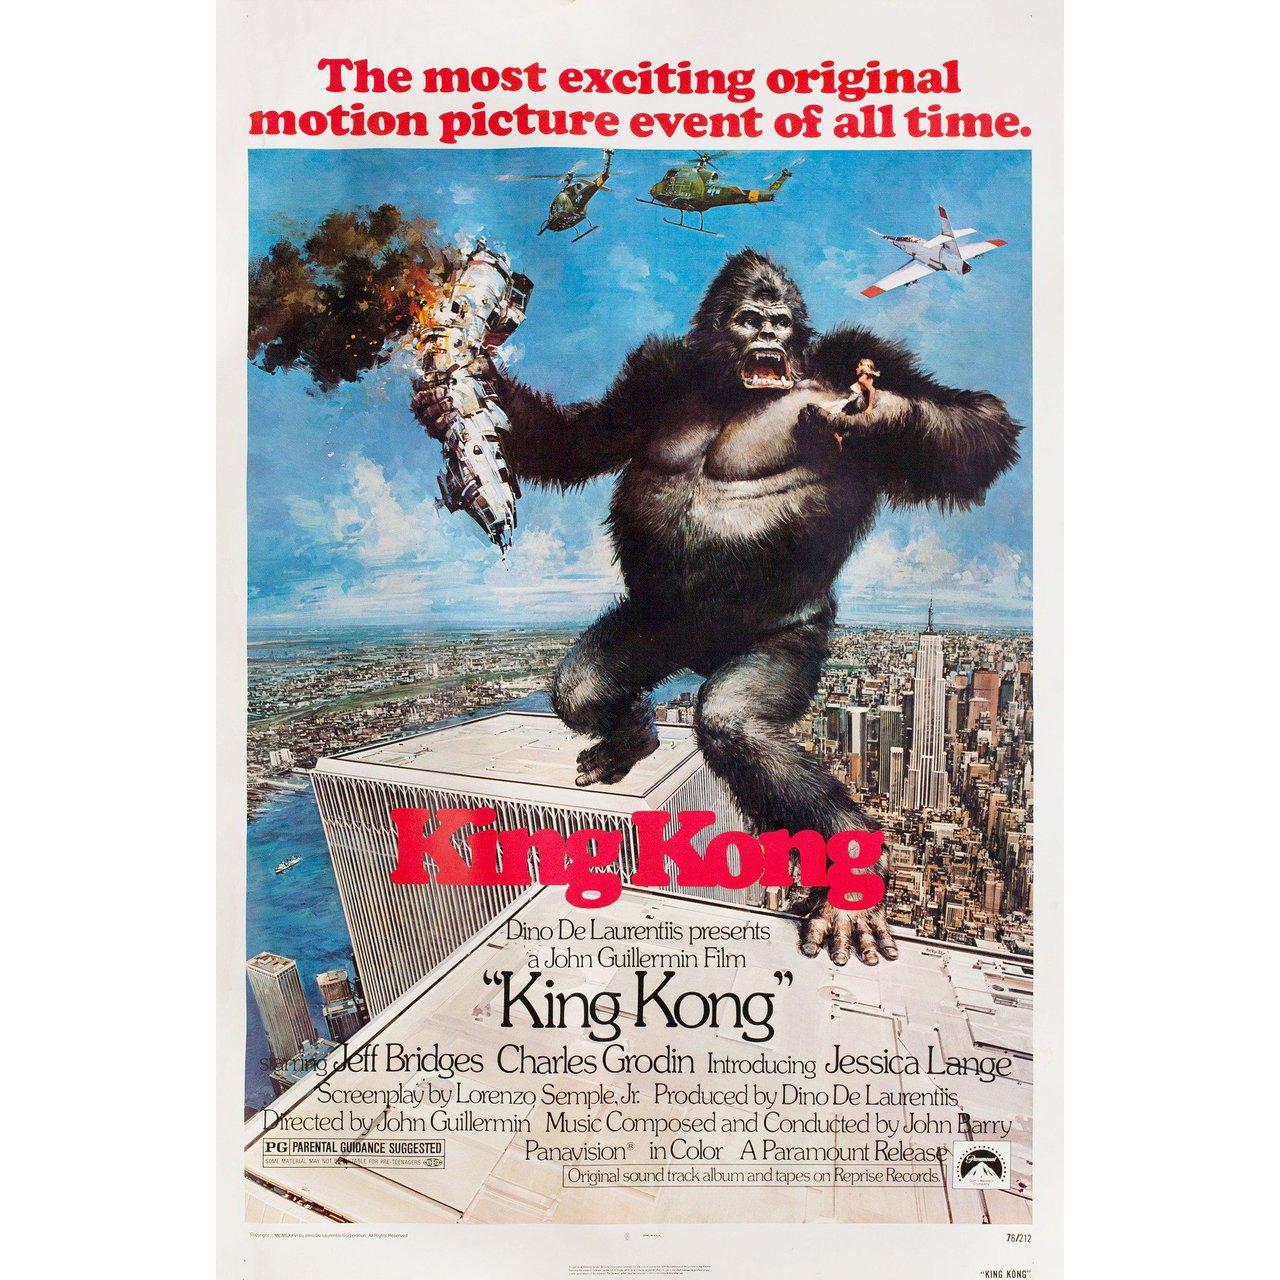 Original 1976 US one sheet poster by John Berkey for the film King Kong directed by John Guillermin with Jeff Bridges / Charles Grodin / Jessica Lange / John Randolph. Very good-fine condition, rolled. Please note: the size is stated in inches and